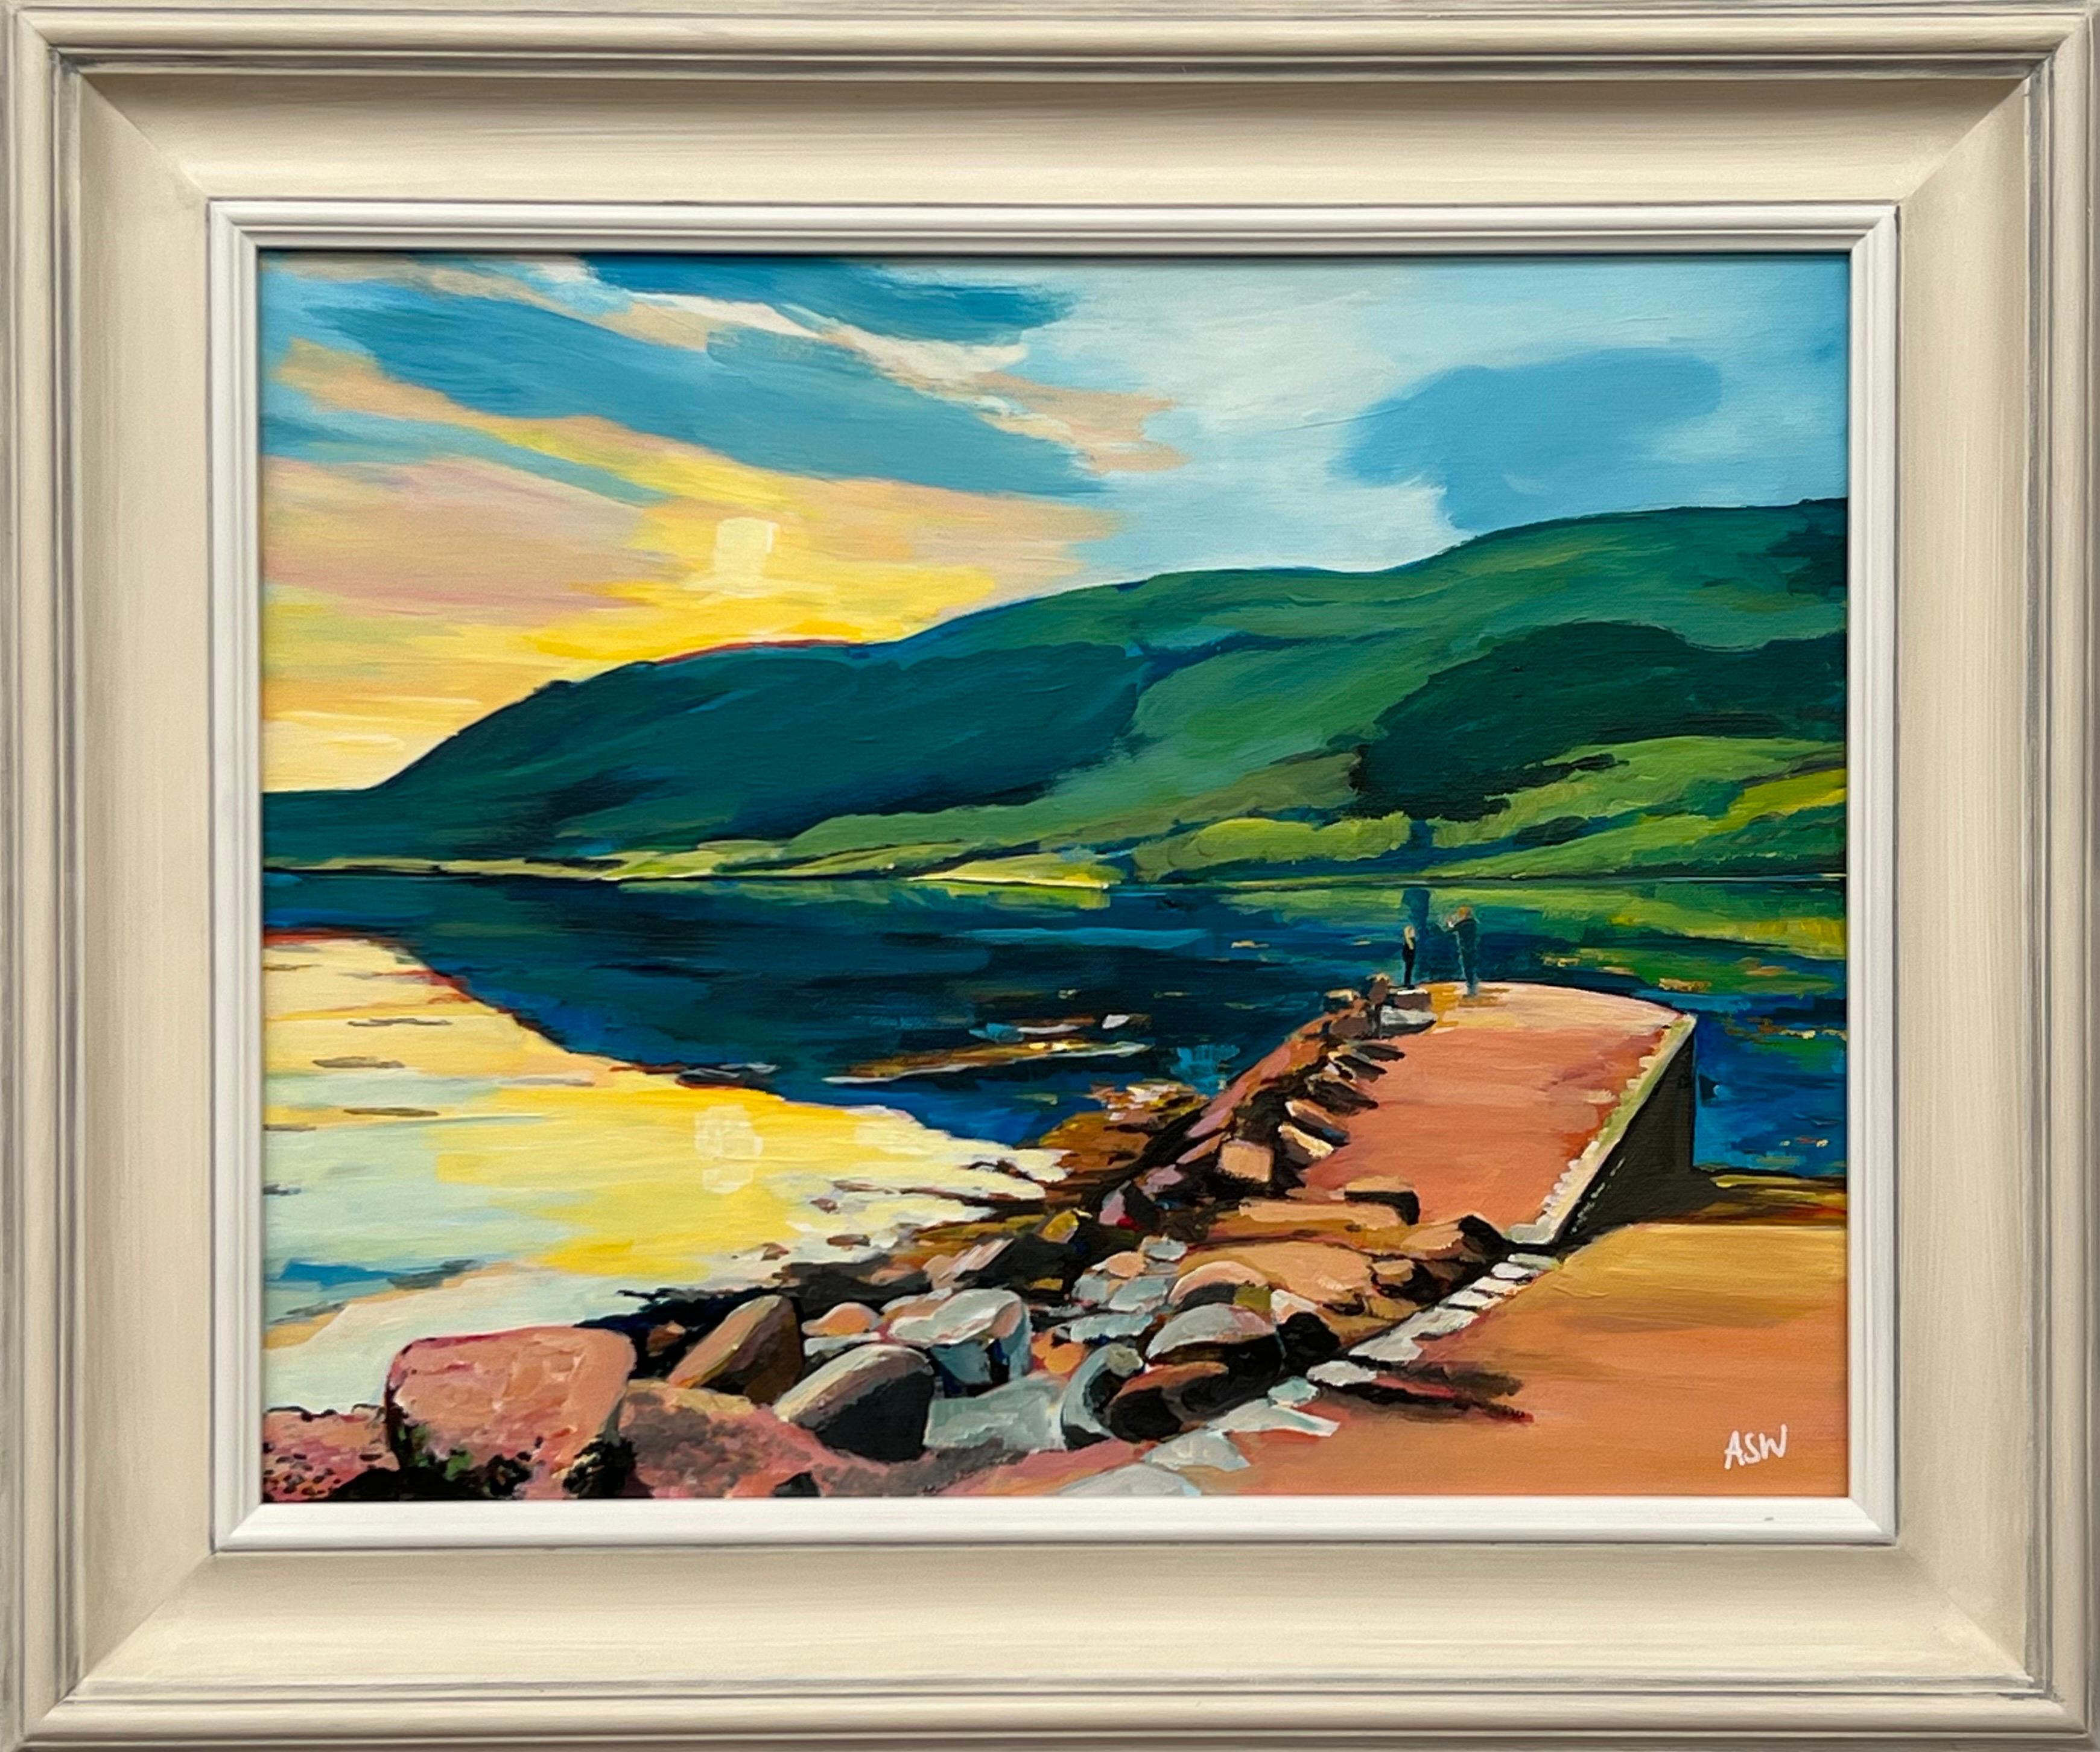 Angela Wakefield Figurative Painting - Sunset at Loch in the Mountains of the Scottish Highlands by Contemporary Artist